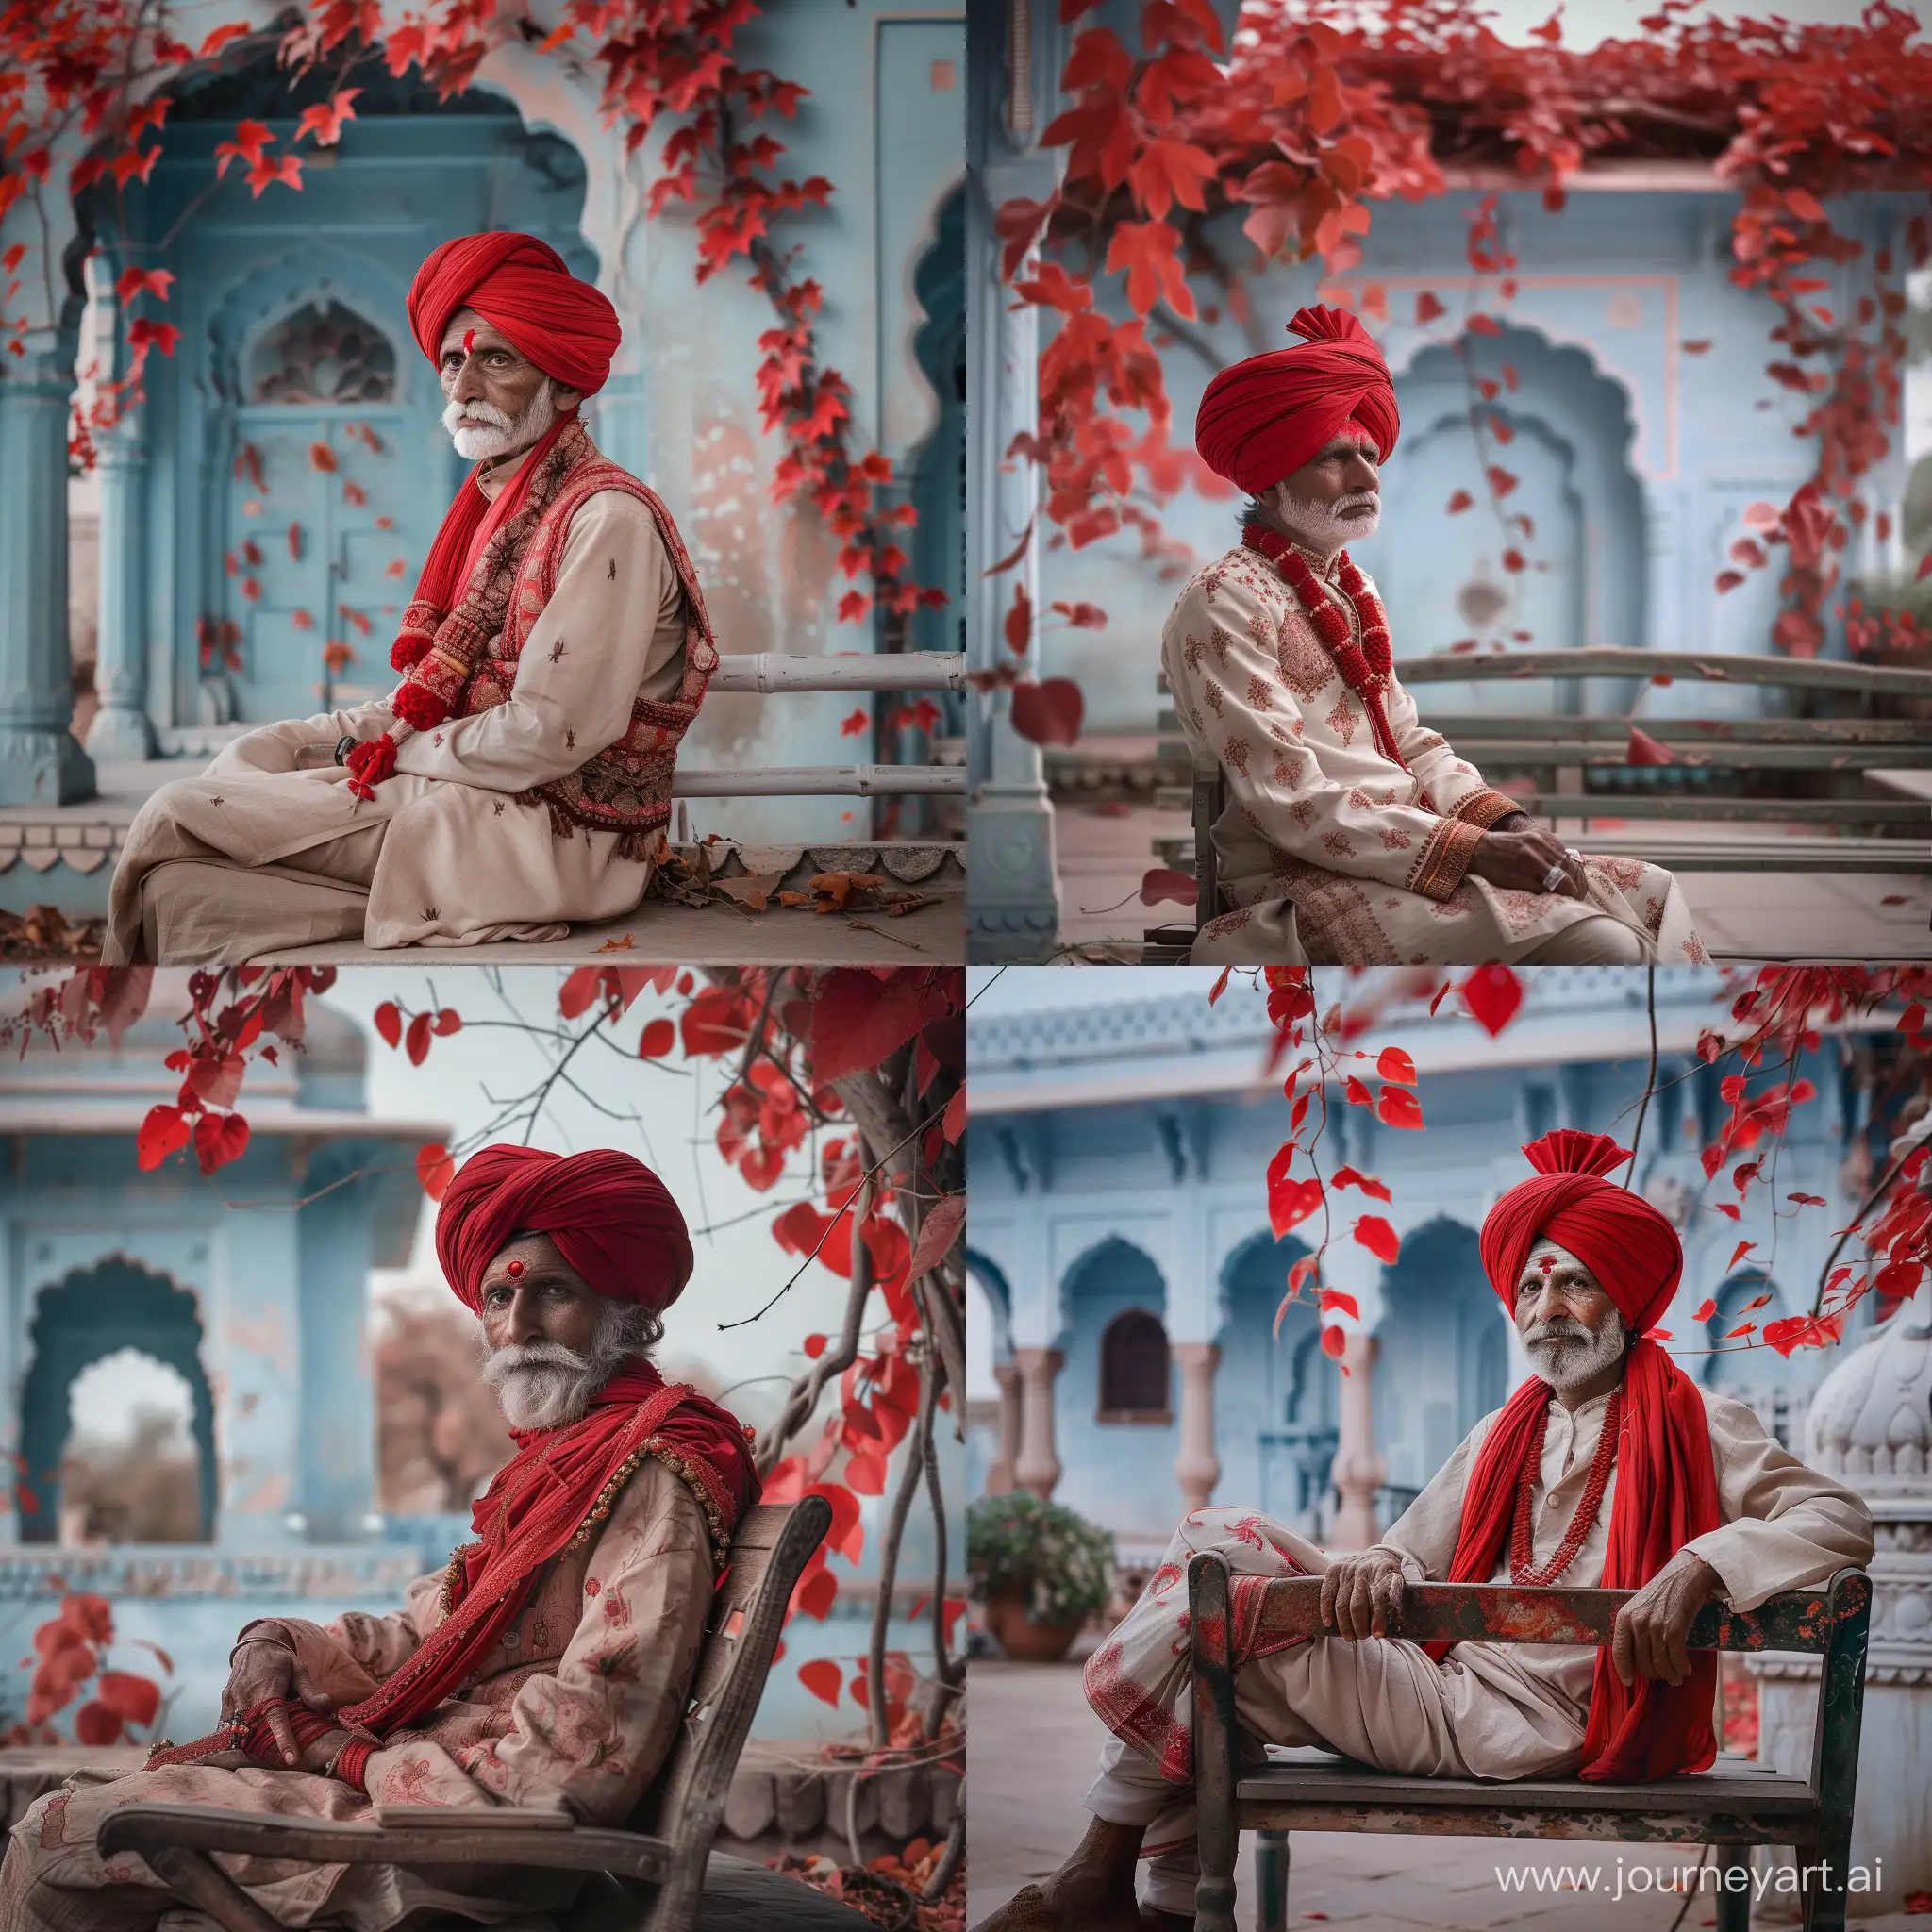 Rabaris-Elder-in-Traditional-Attire-Resting-by-Old-Palace-with-Climbing-Red-Leaves